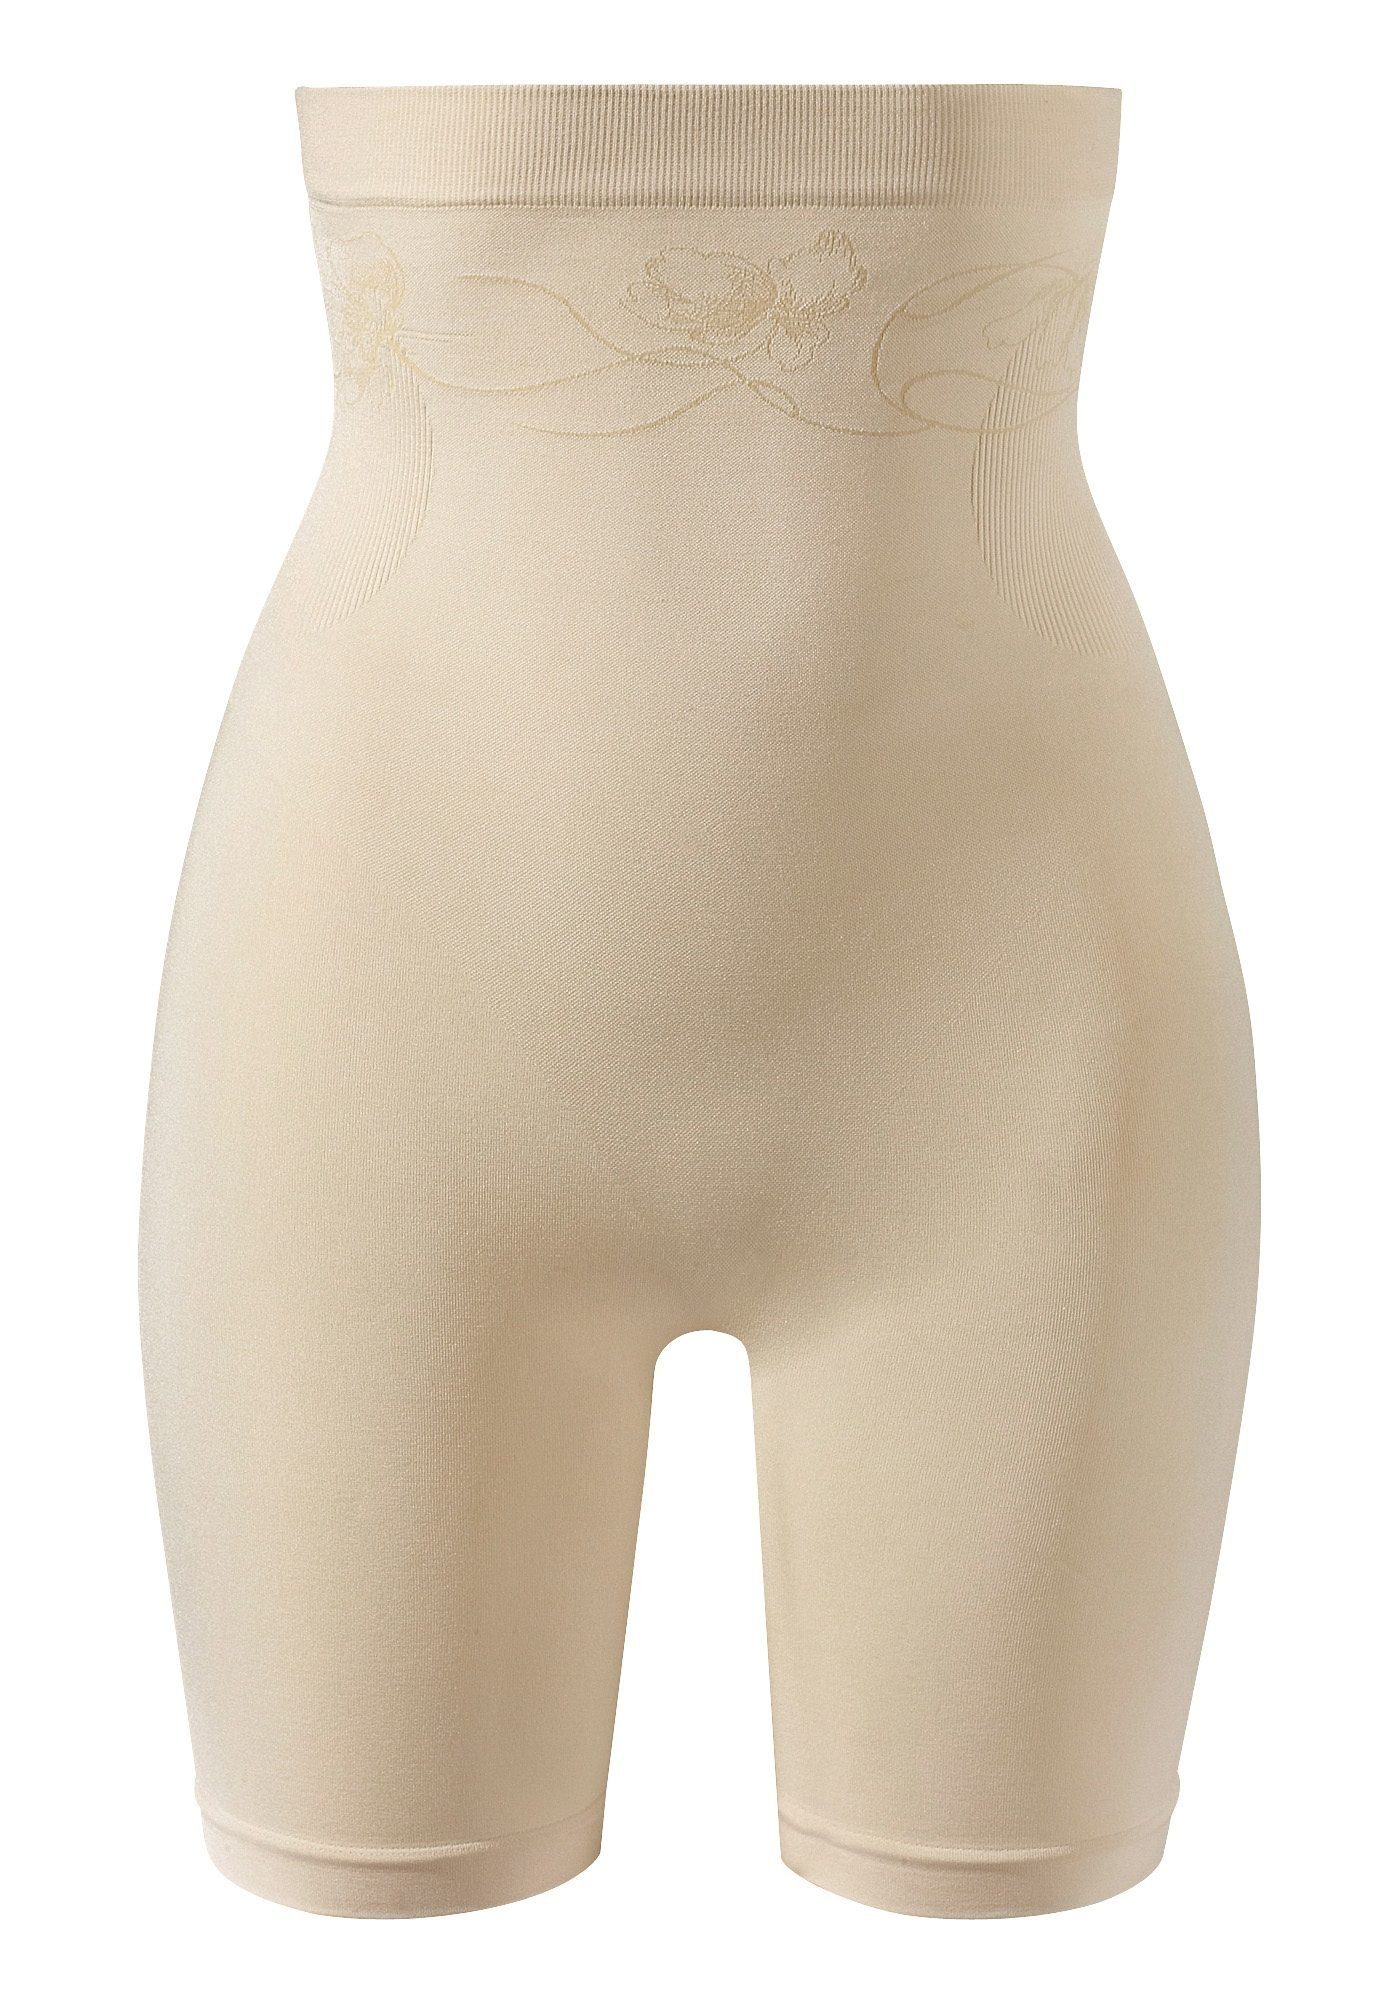 Shapinghose Basic mit Dessous hoher LASCANA champagner SEAMLESS Taille,